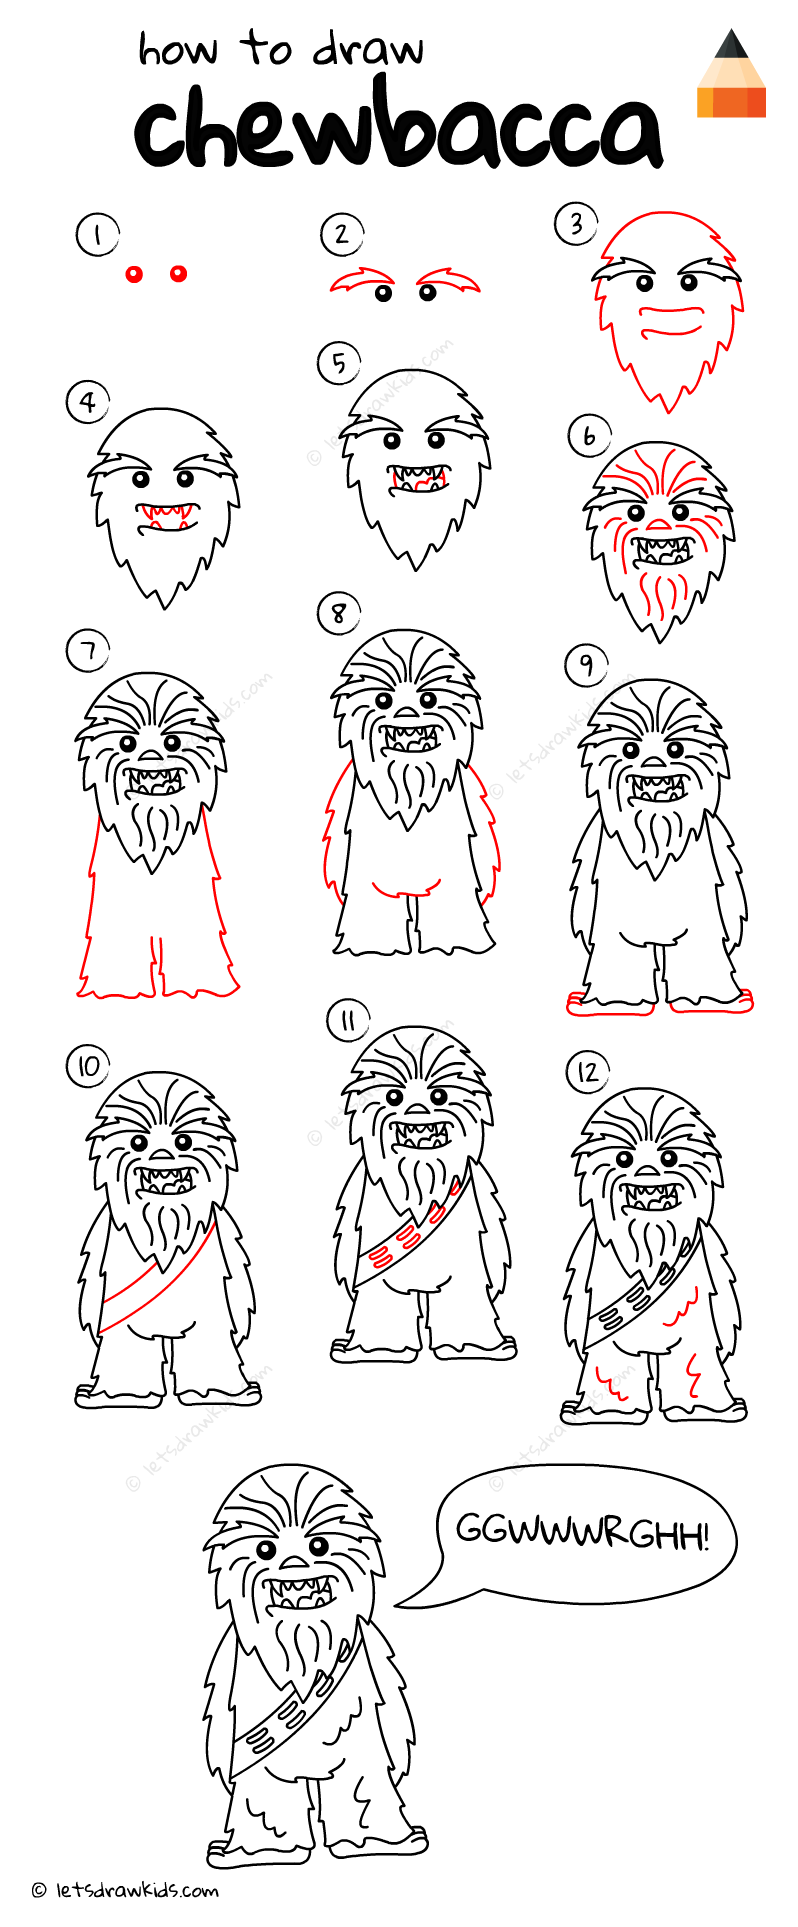 chewbacca clipart easy